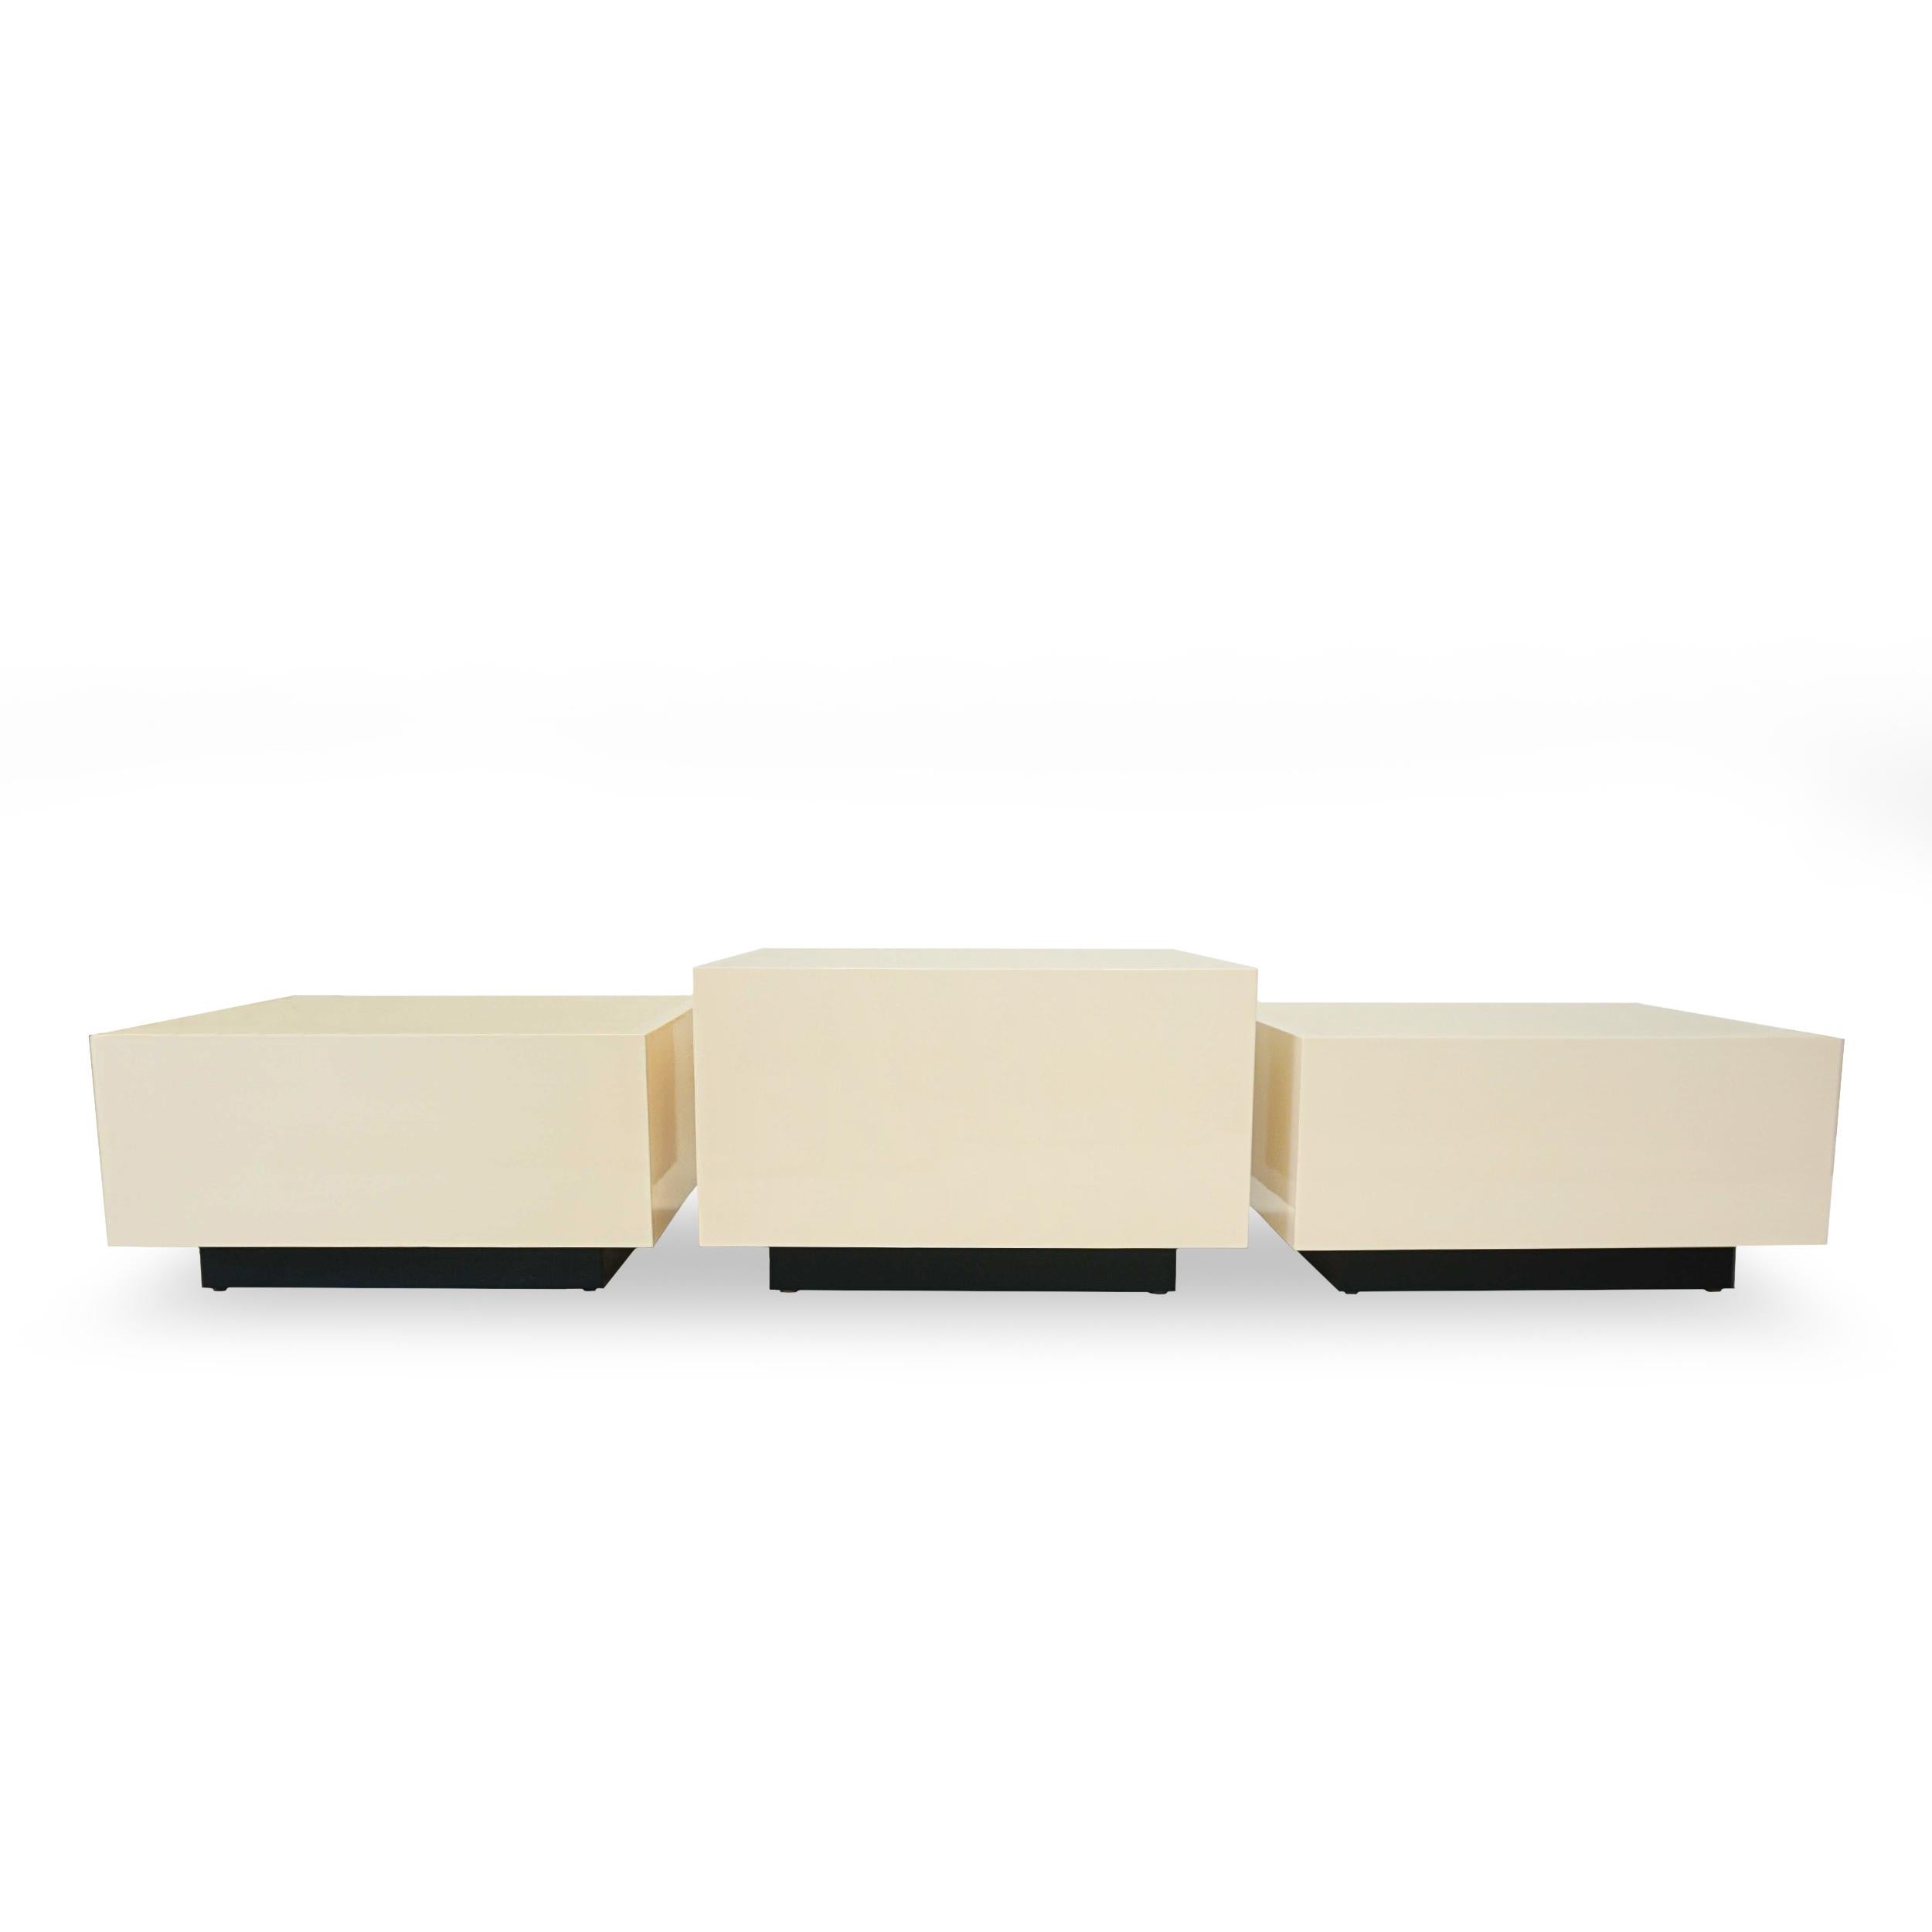 Set of 3 creamy colored lacquered cube cocktail tables built from solid hard maple. Inset top surface color is framed on all sides by a lighter shade of the same hue. Bases of the tables are stained in a dark carbon. Sizes and paint and stain